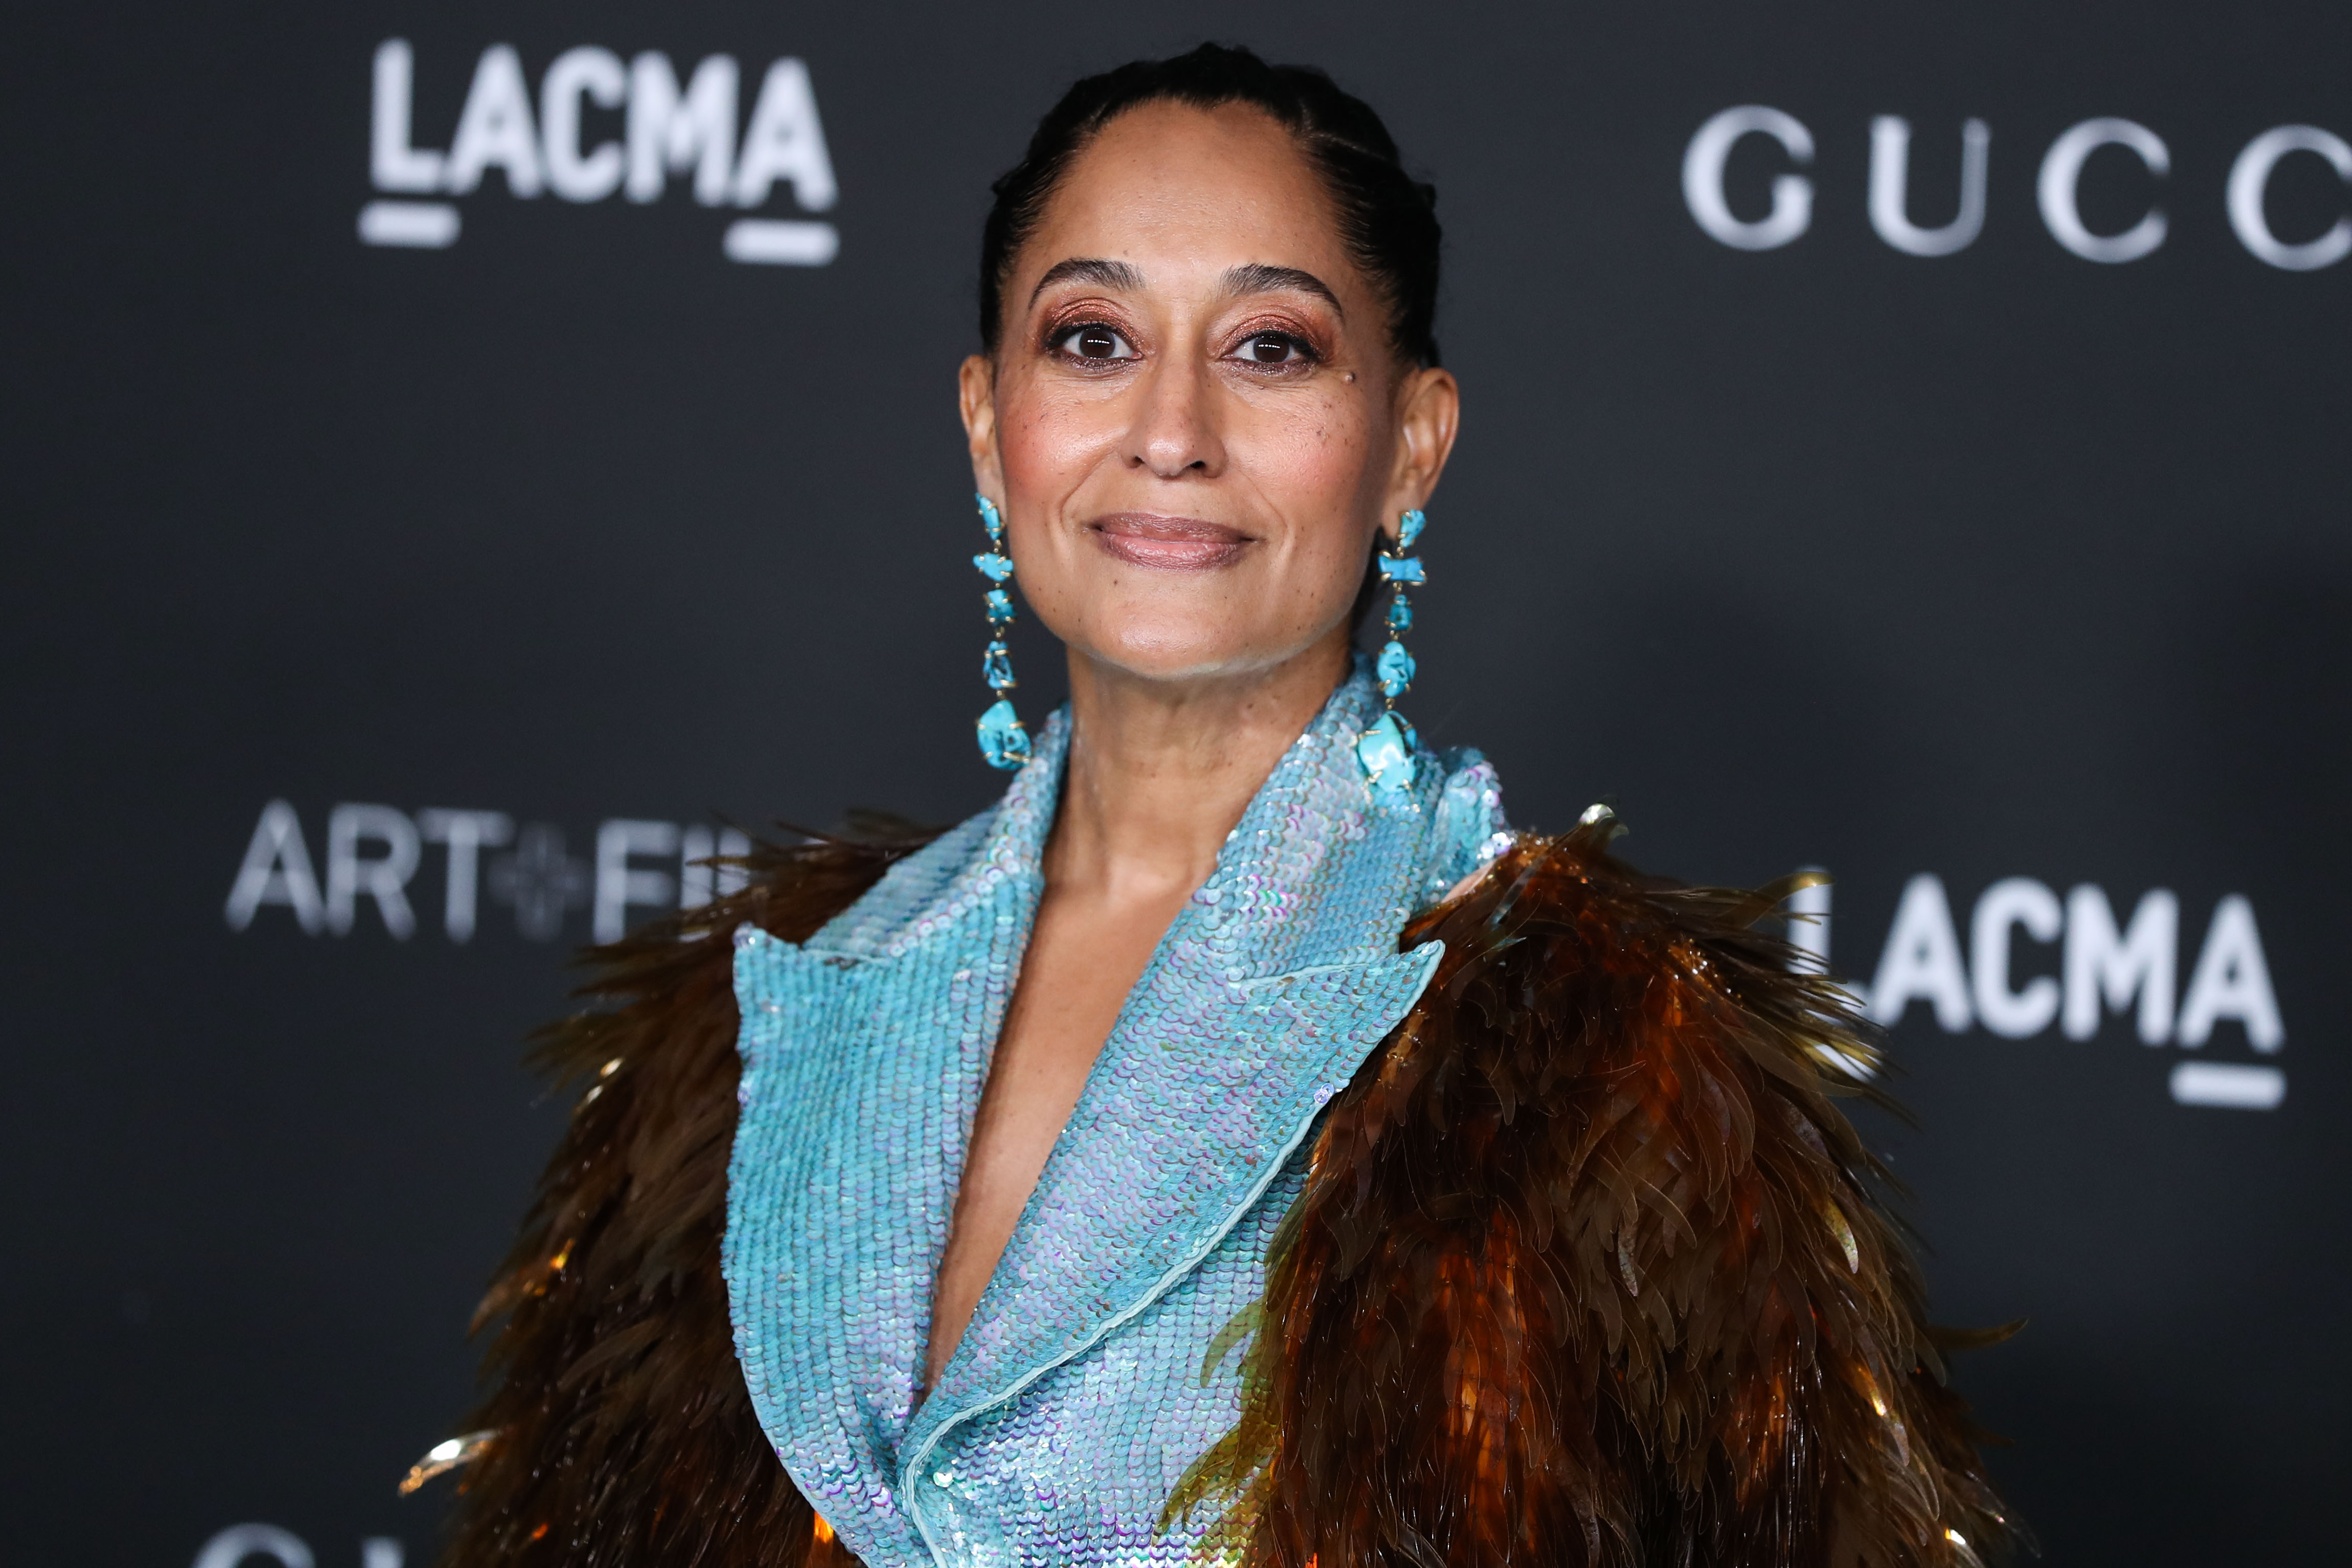 Tracee Ellis Ross’ Los Angeles Home Is Full of Colorful Decor! Take a Tour of Her Beautiful House